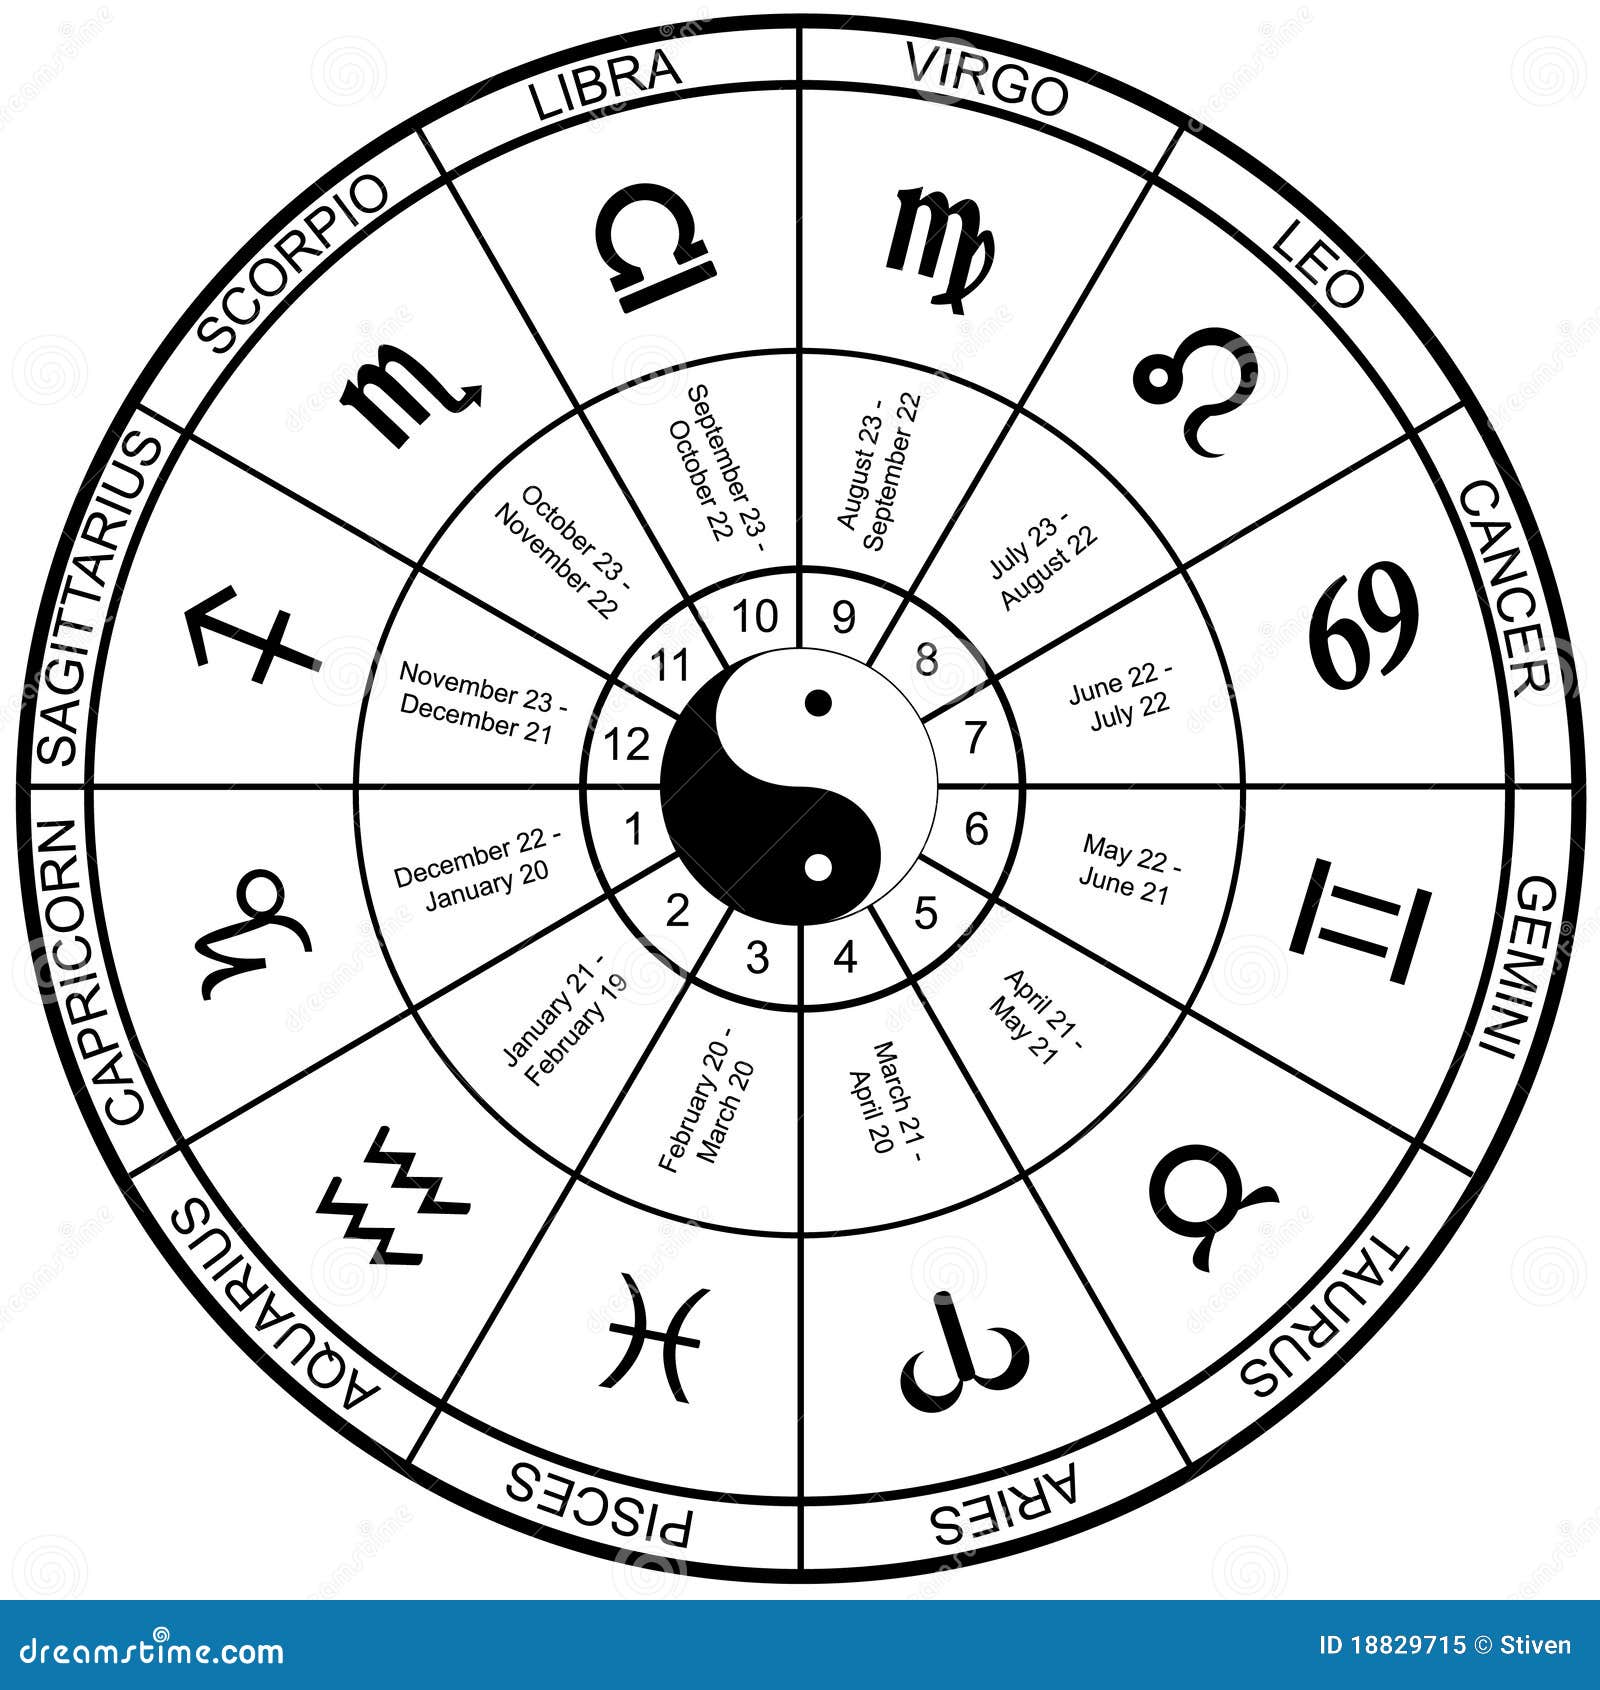 buddhism-and-astrology